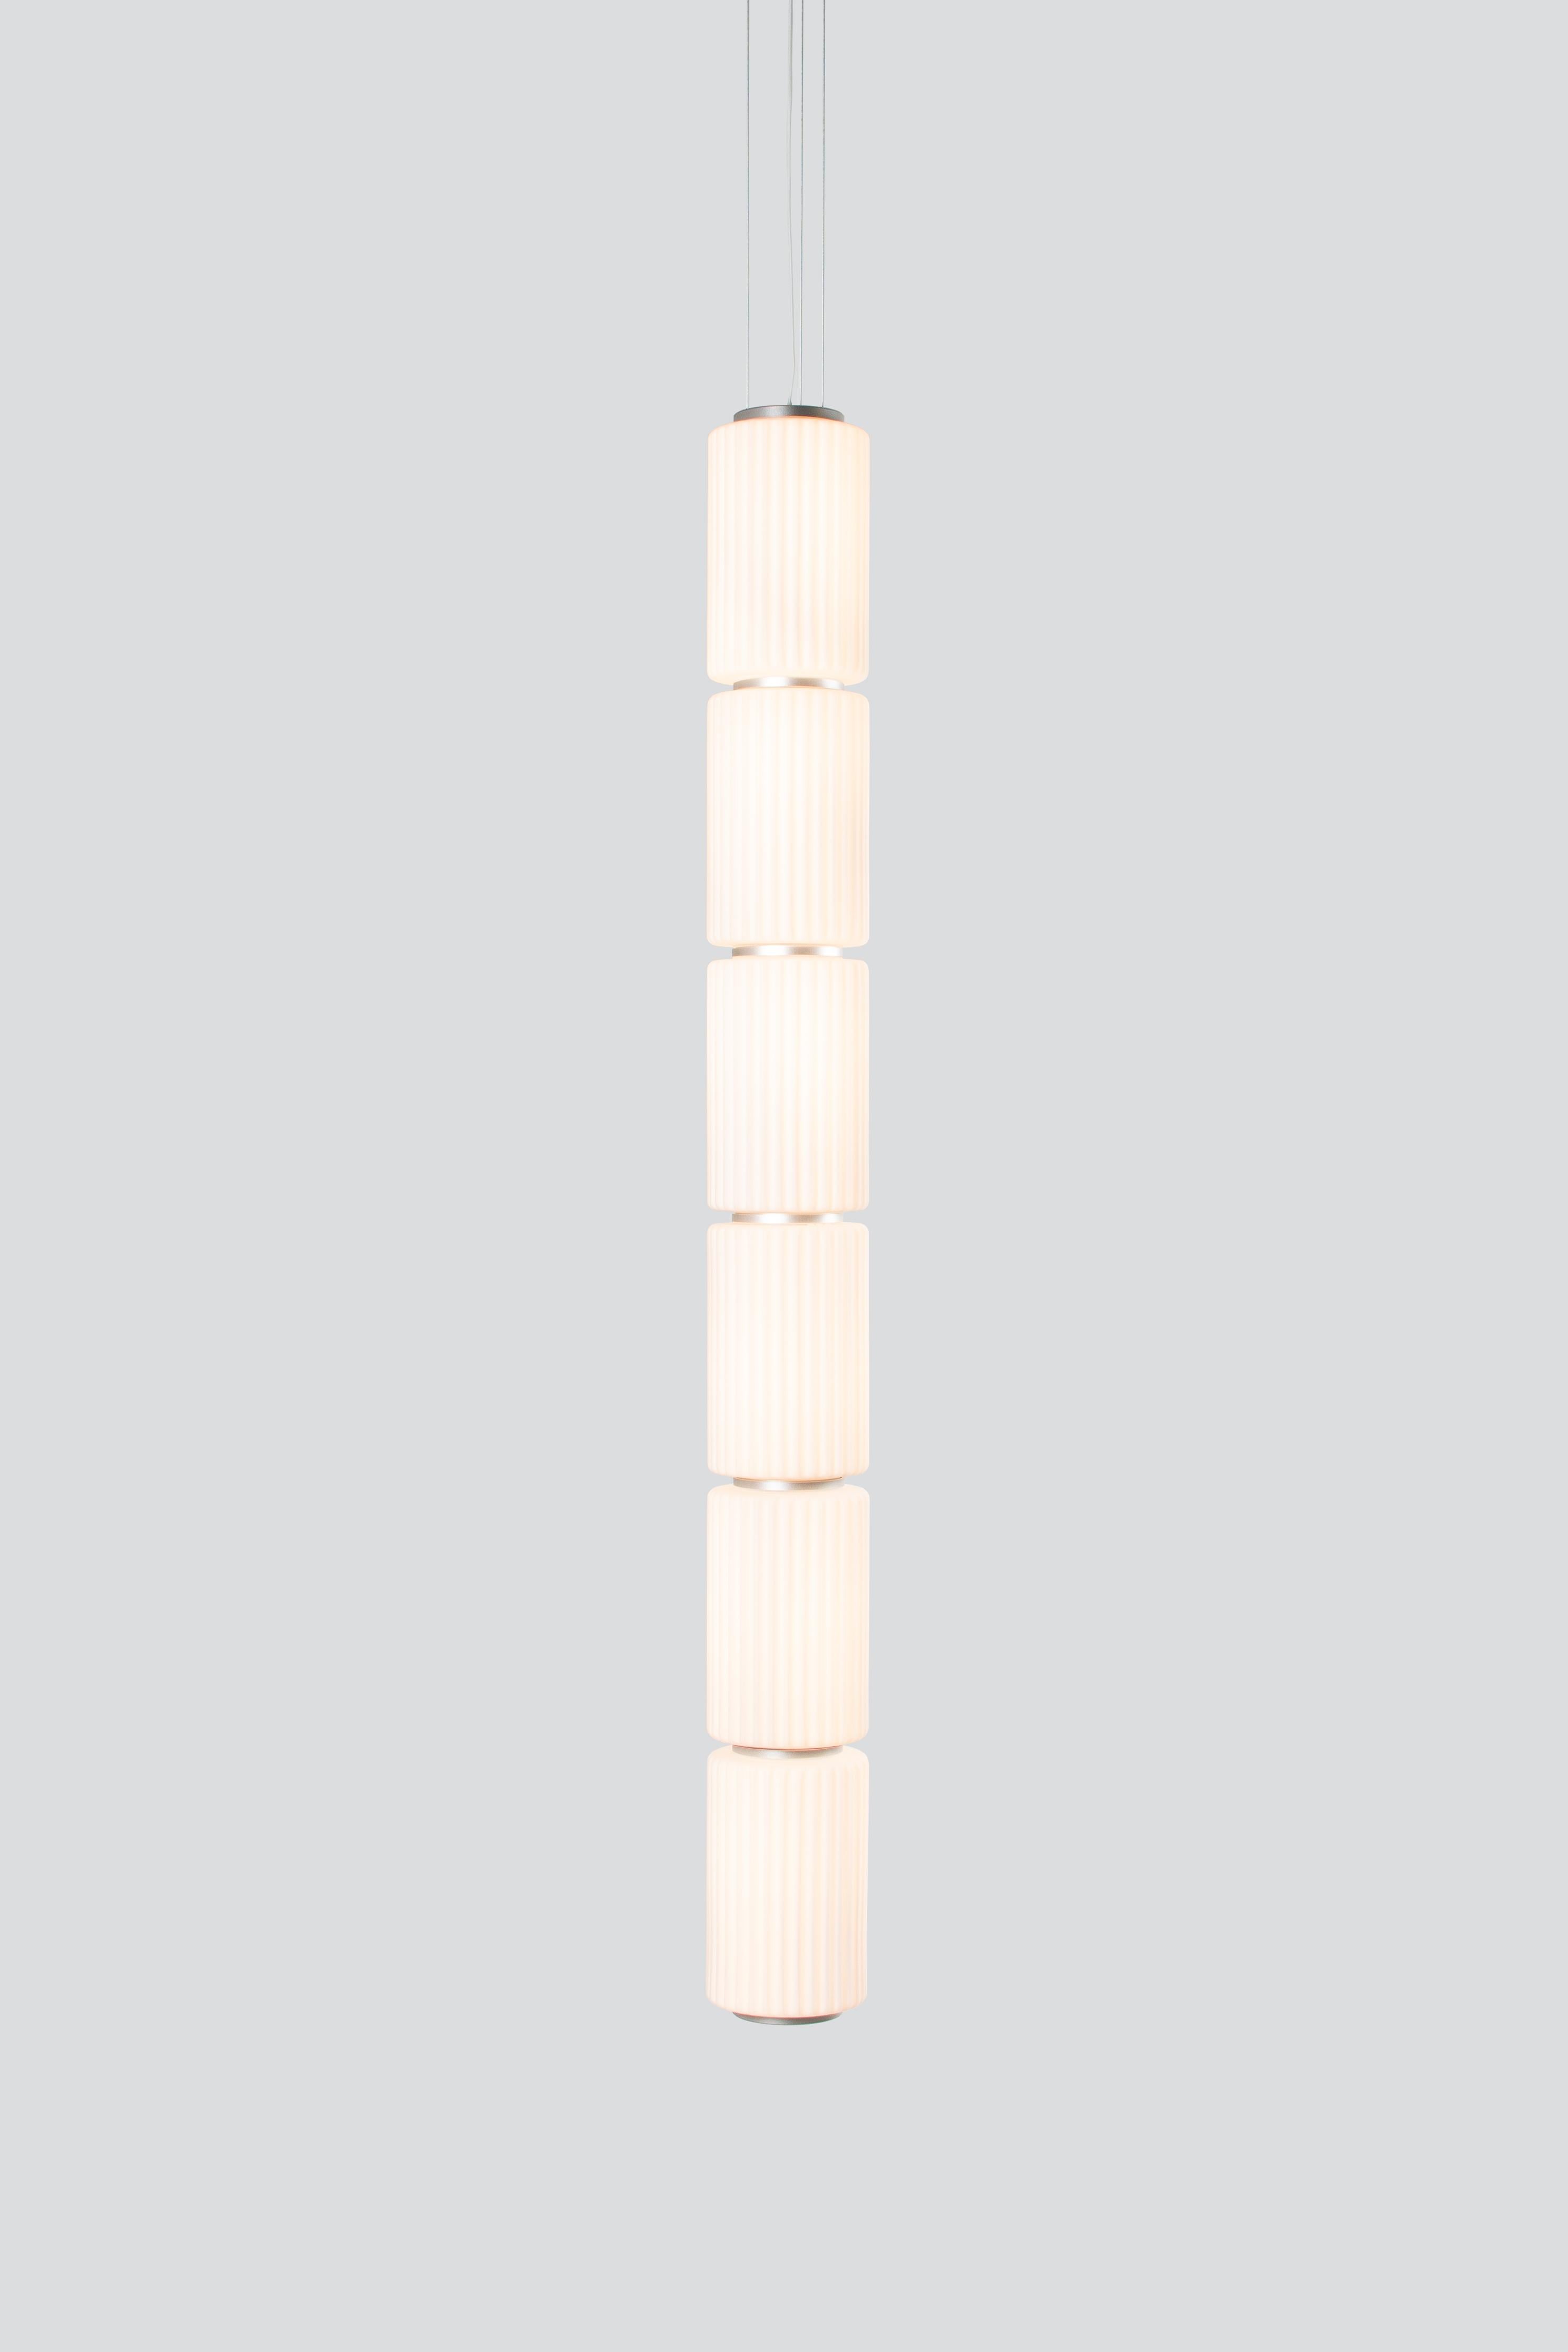 Canadian Contemporary Pendant Lamp 'Column' 175-6, Vertical, Ivory For Sale